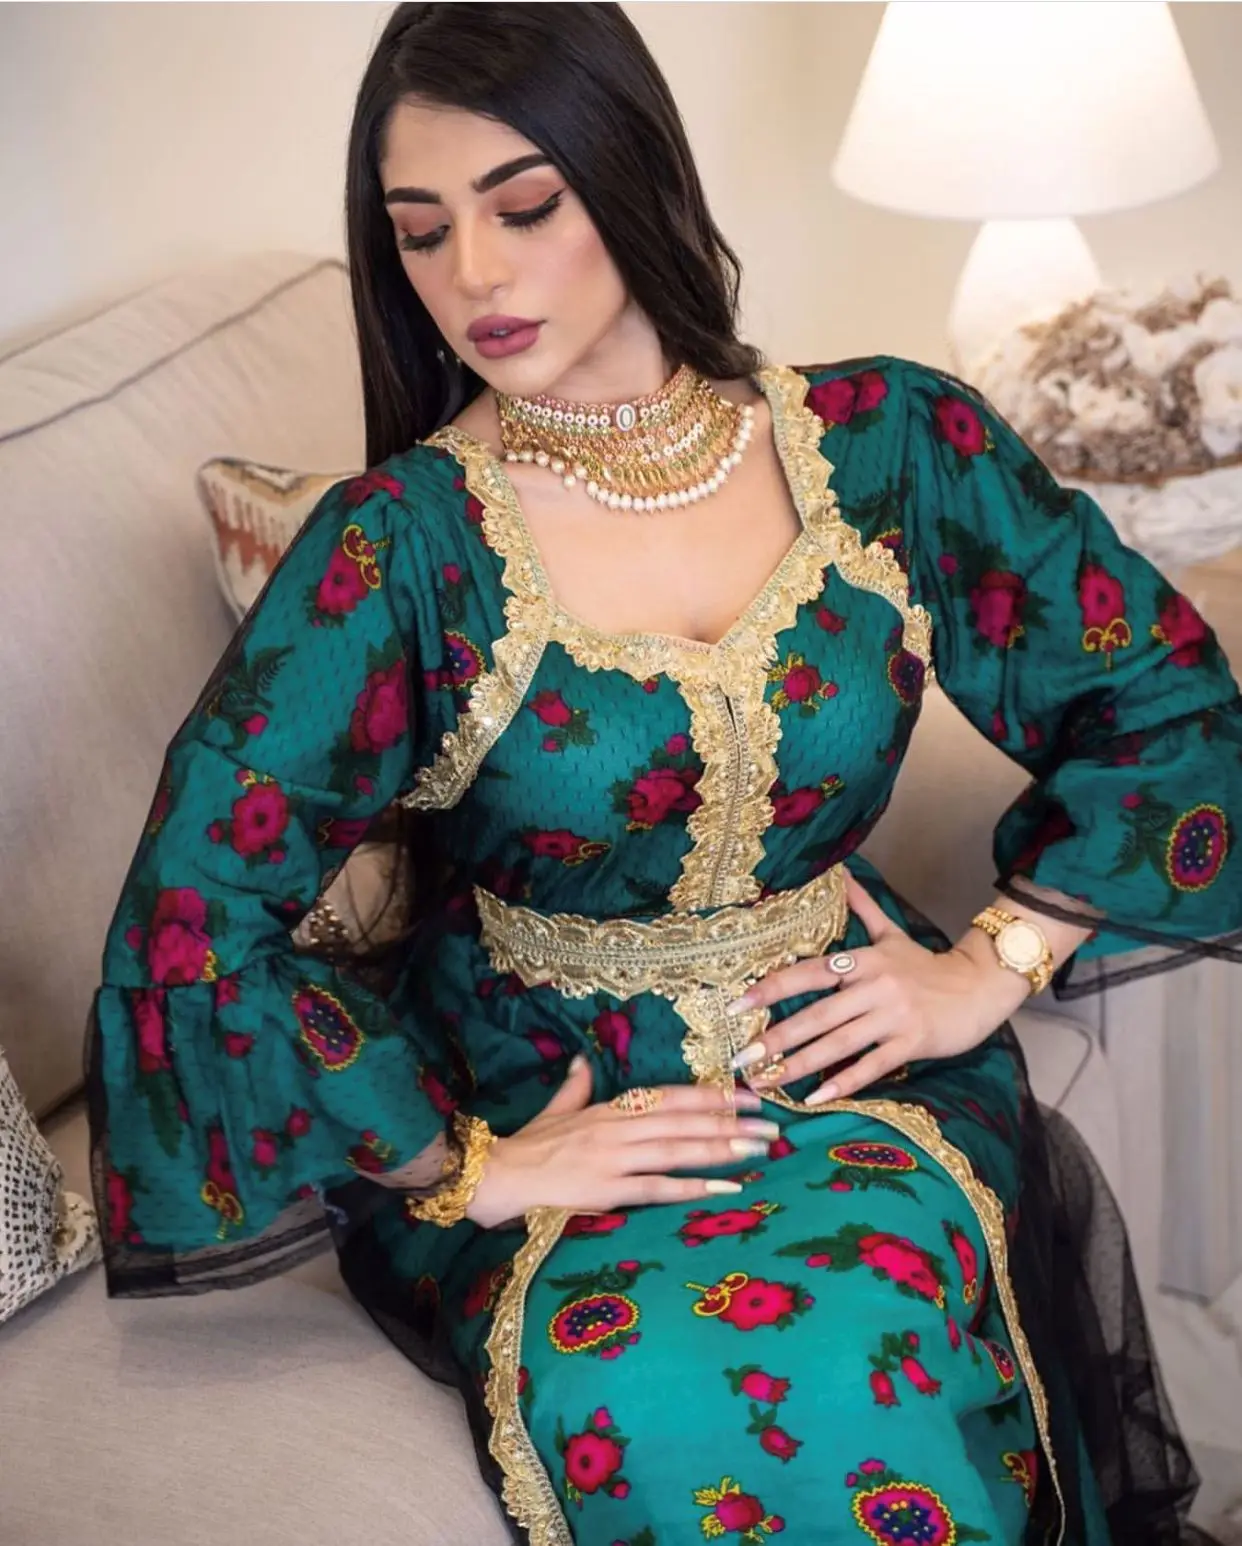 

2021 New Design Mesh dress Middle Eastern National Style Printed embroidery lace Dubai Muslim Abaya for Women, Customers' requirements